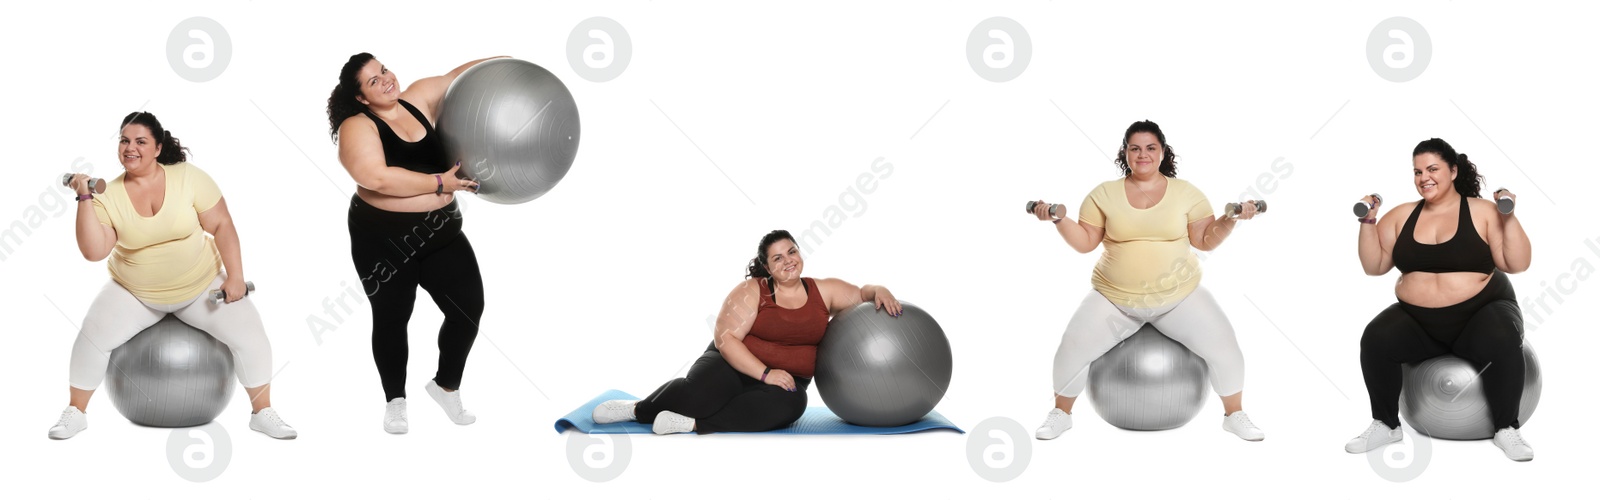 Image of Collage of overweight woman with fitball doing exercises on white background. Banner design